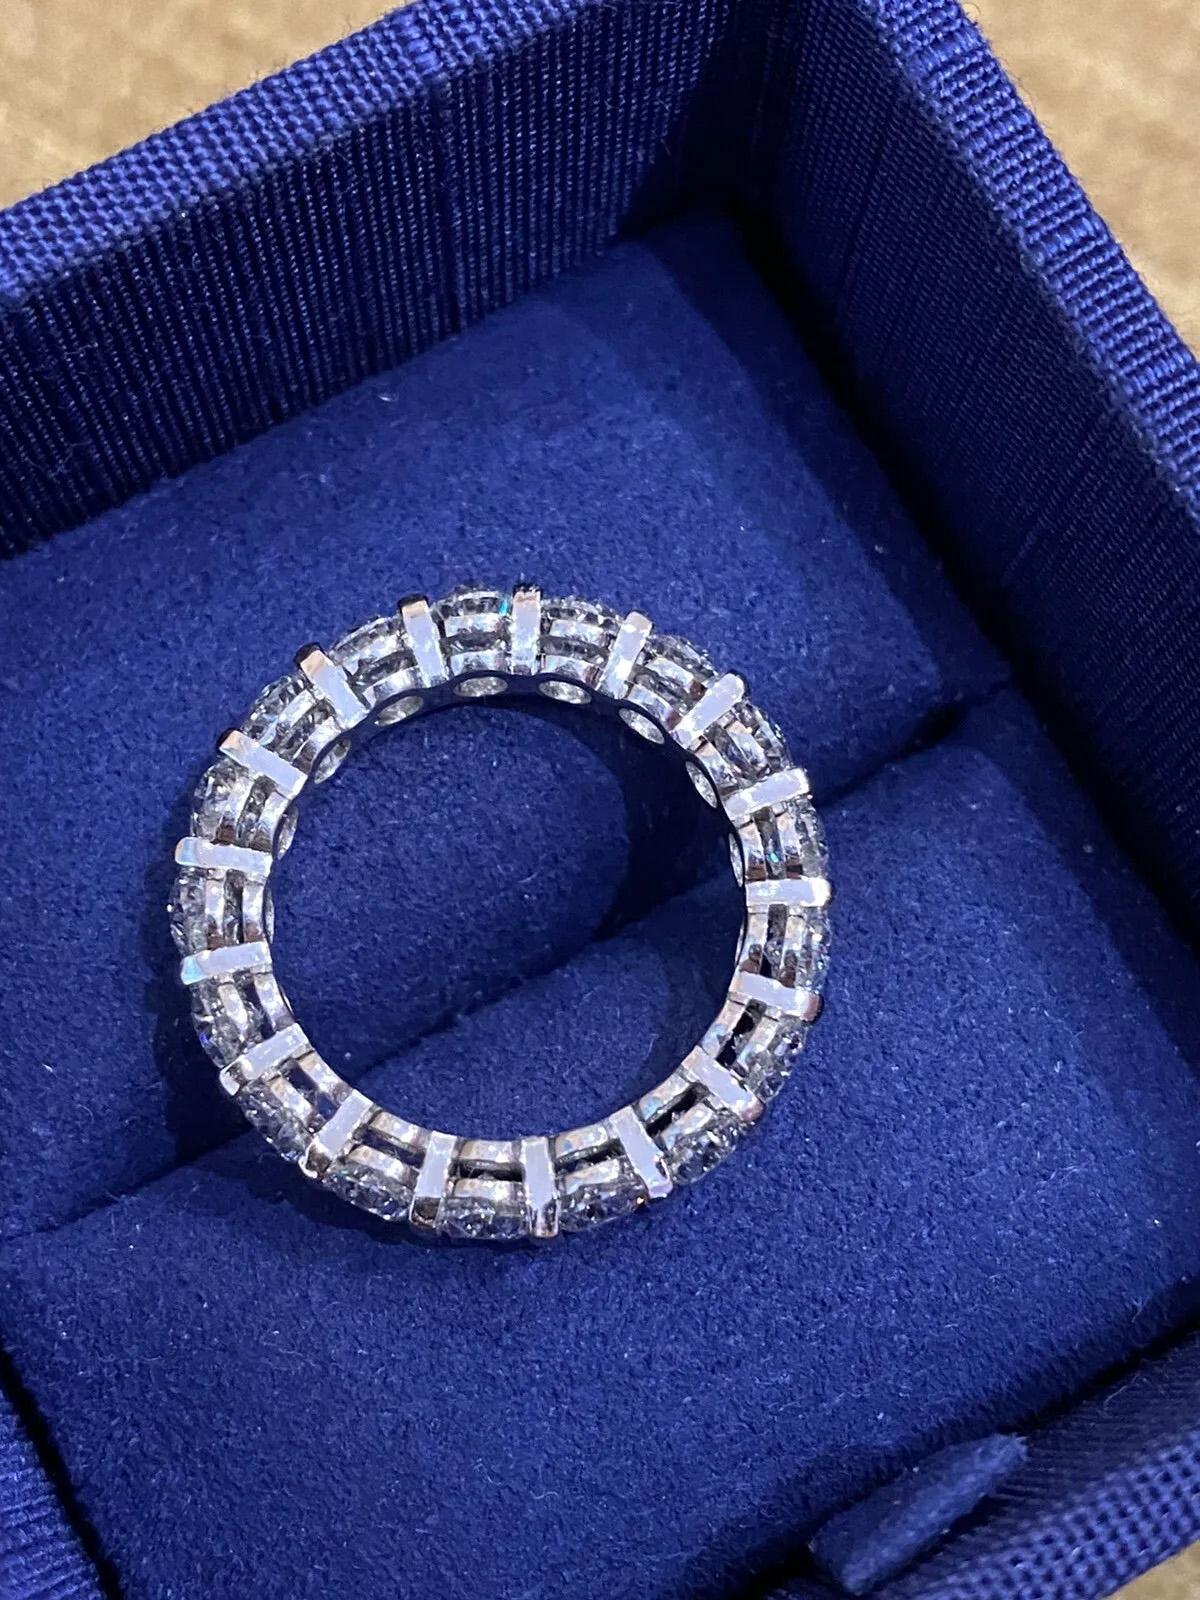 5.25 Carats Total Weight Oval Diamond Eternity Band Ring in Platinum

Diamond Eternity Band Ring features 17 beautiful Oval shaped Brilliant cut Diamonds prong set in highly polished Platinum. Each diamond averages 0.30 carat each.

Total diamond